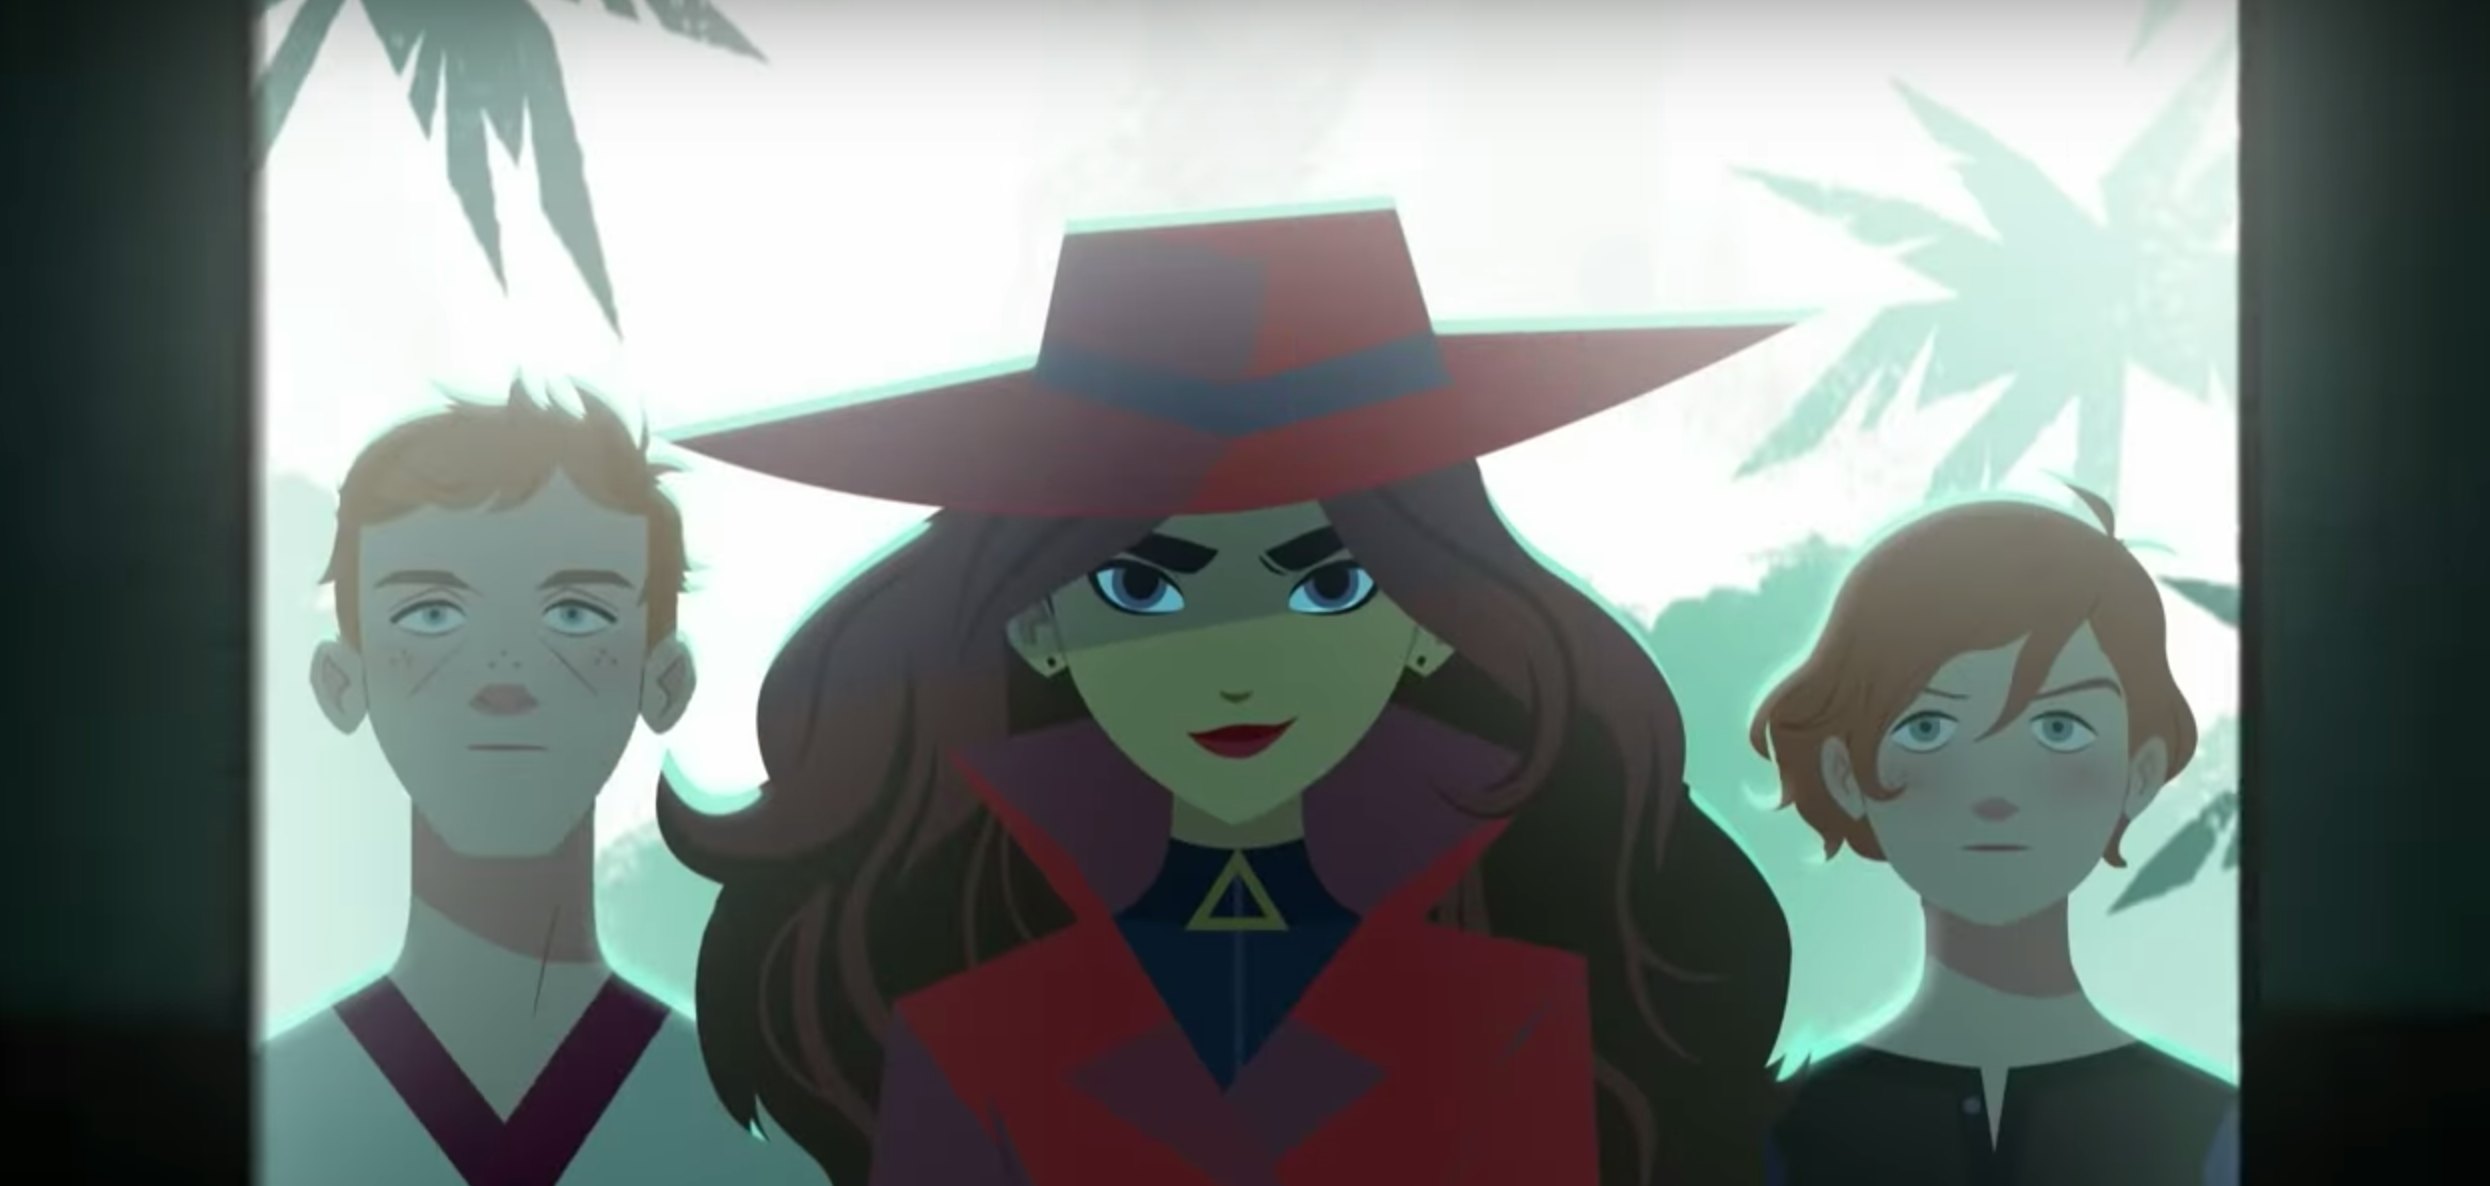 youtube where in the world is carmen sandiego